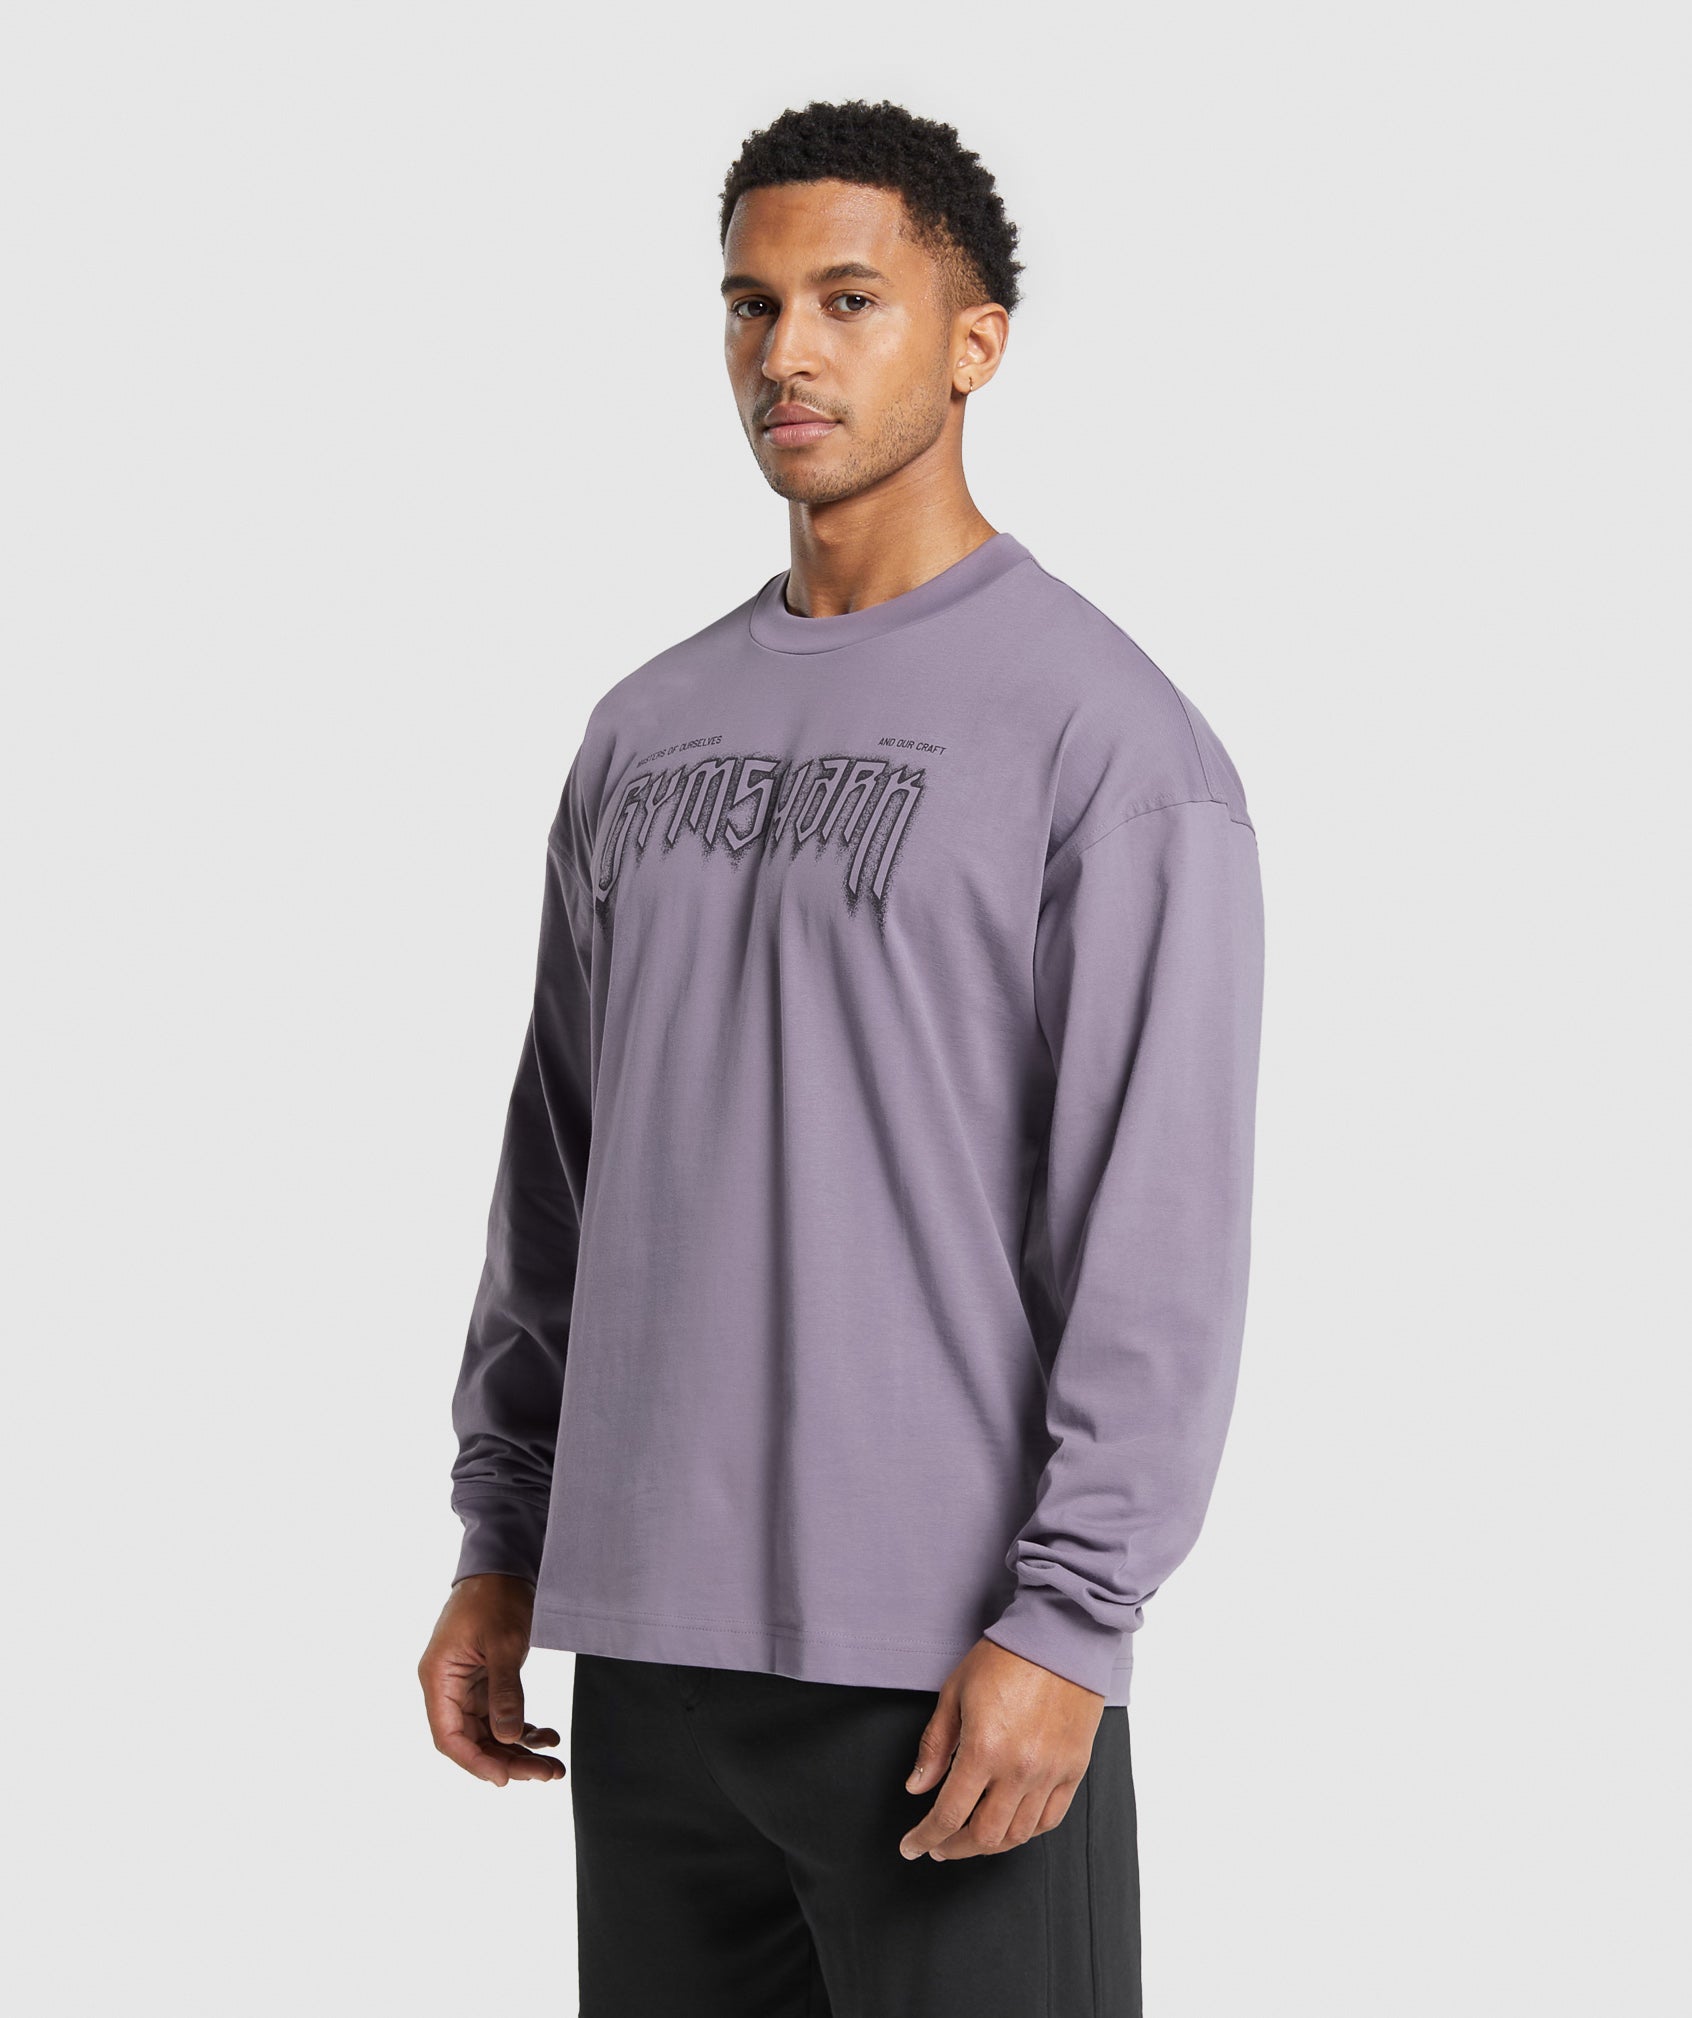 Masters of Our Craft Long Sleeve T-Shirt in Fog Purple - view 3